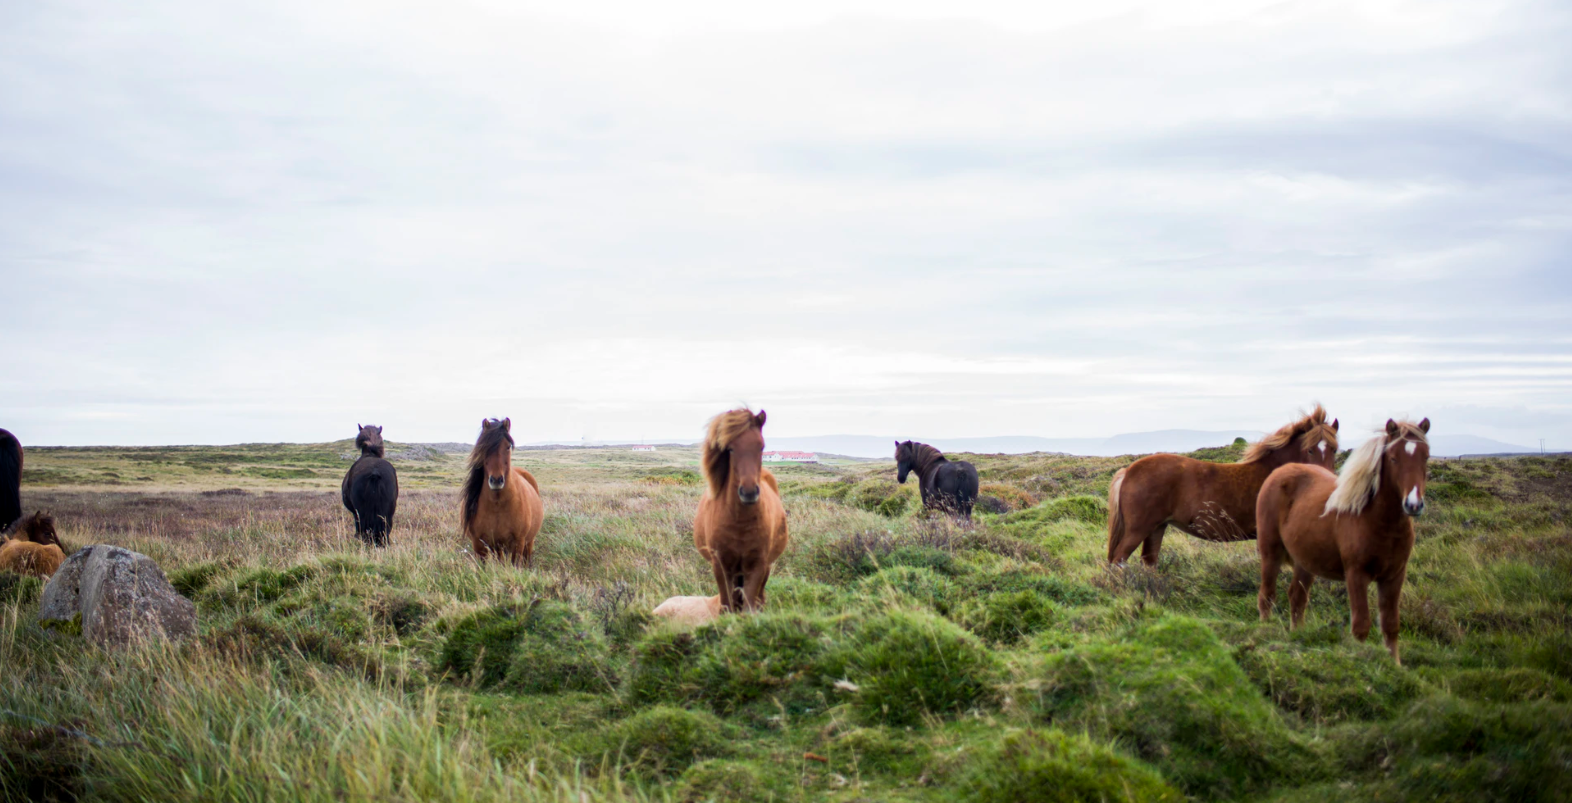 Horses standing in a field staring at the camera